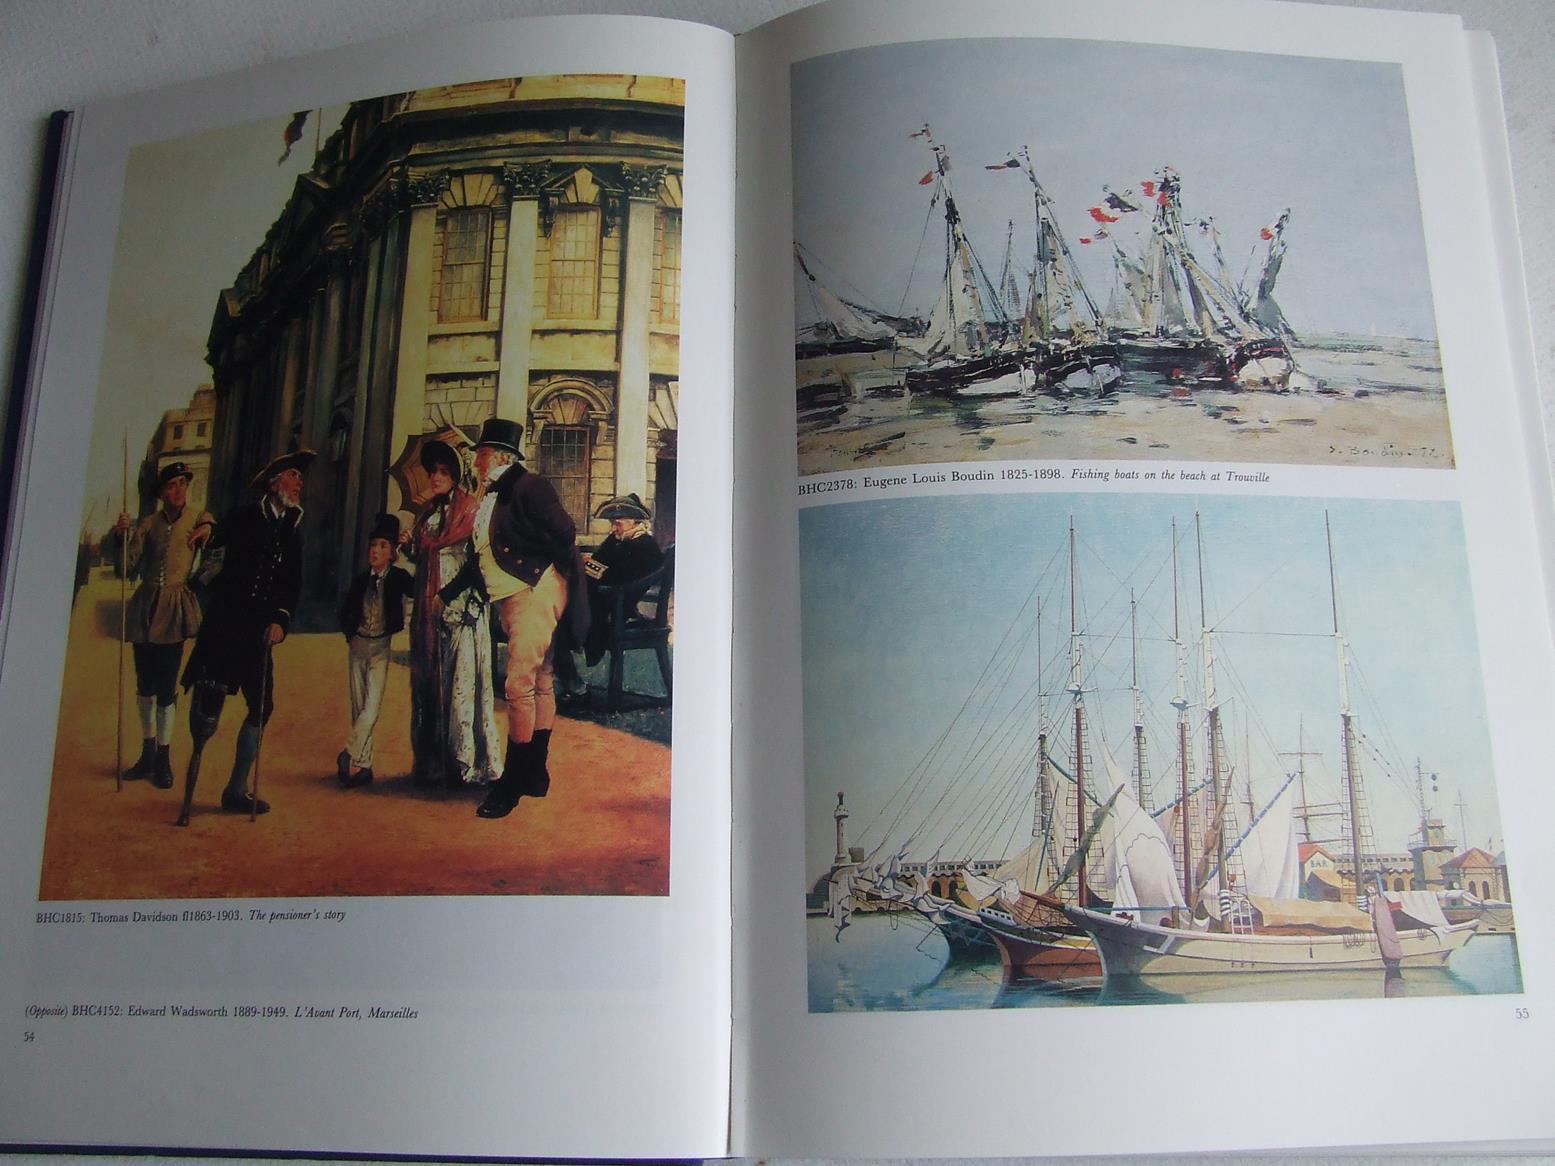 Concise Catalogue of Oil Paintings in the National Maritime Museum